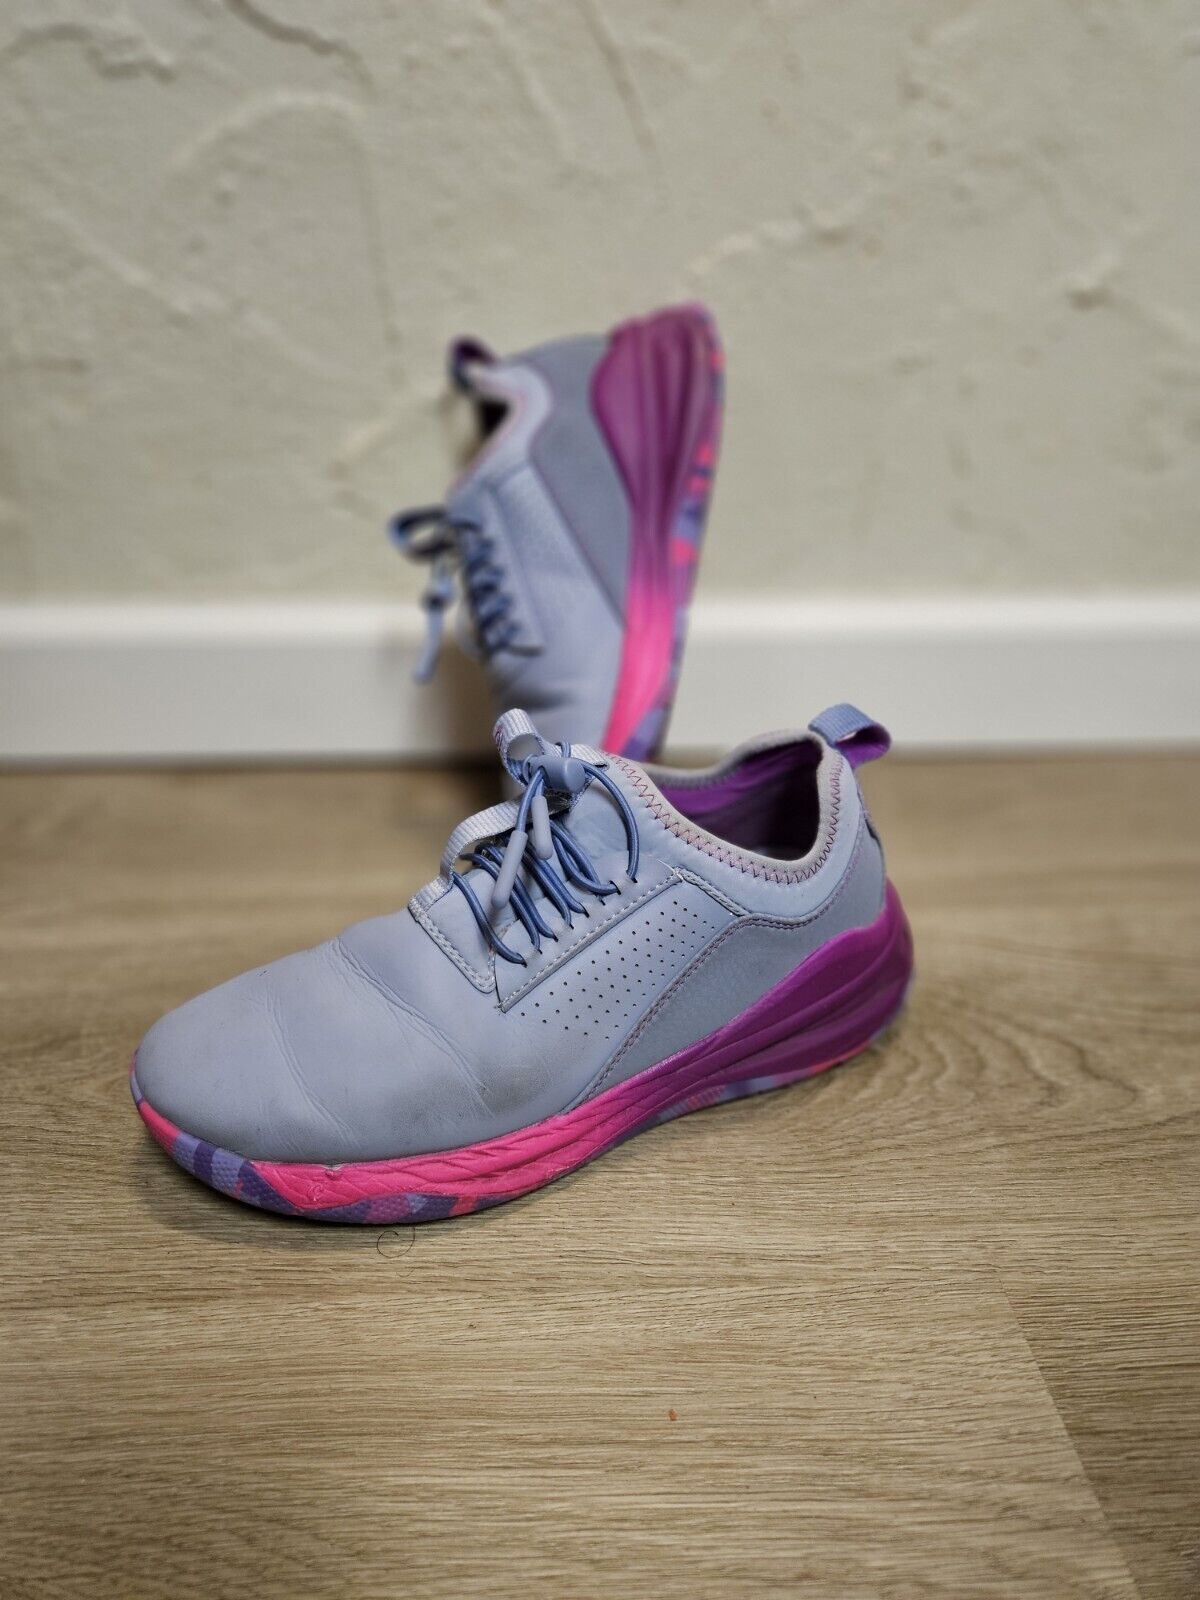 Clove Classic Gray Pink Nursing Shoes Sneakers He… - image 4